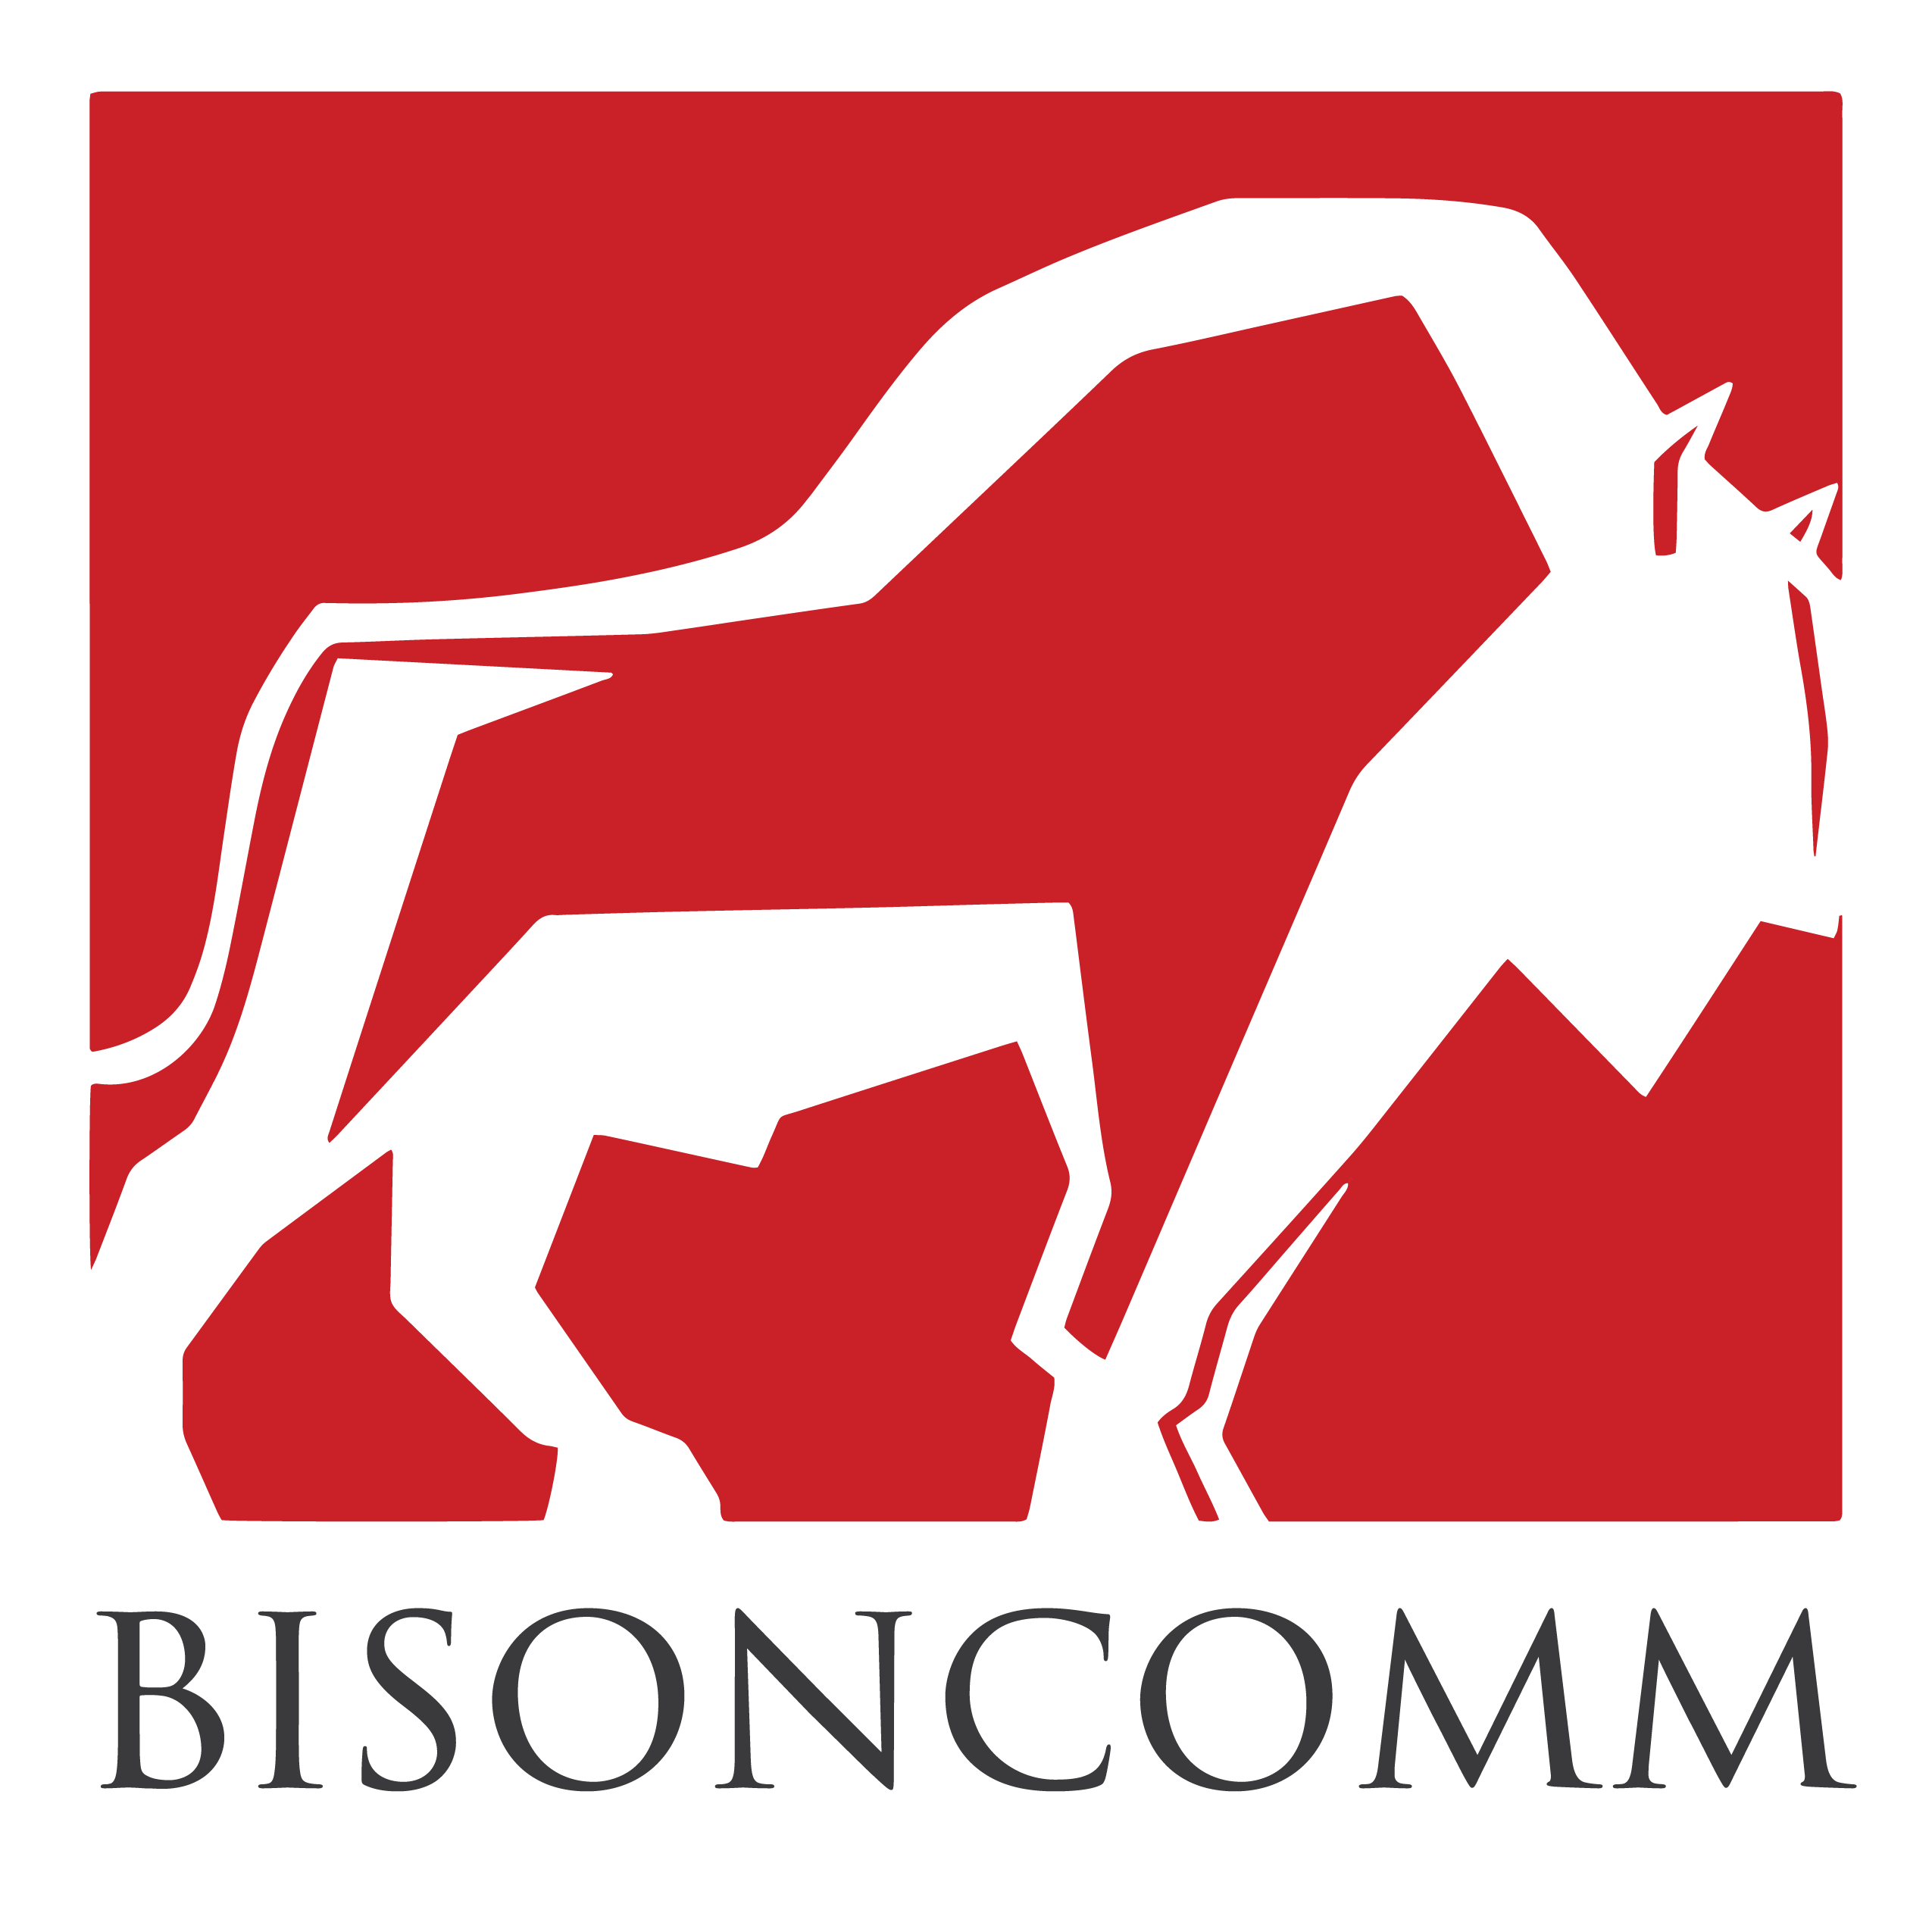 Bisoncomm Group